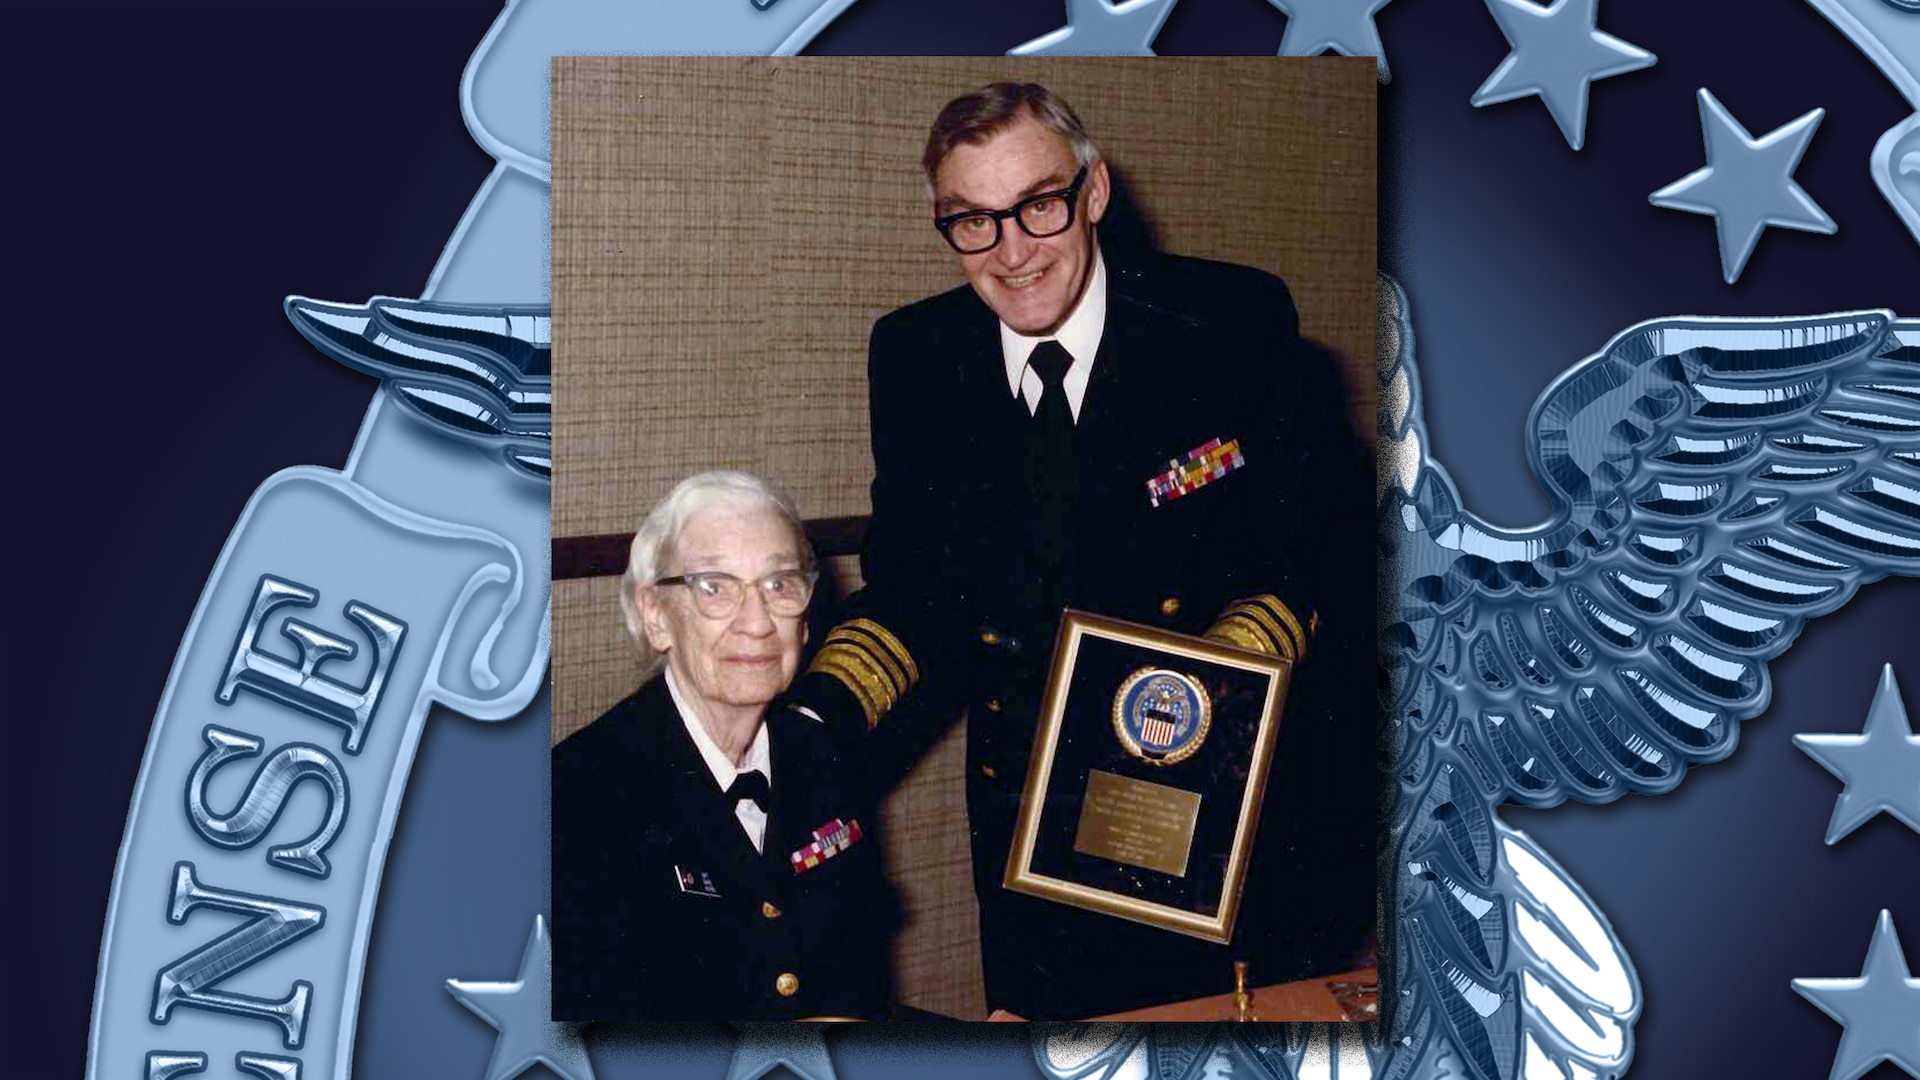 Man in dress Navy uniform holds a plaque he's presenting to a woman in a Navy dress uniform.